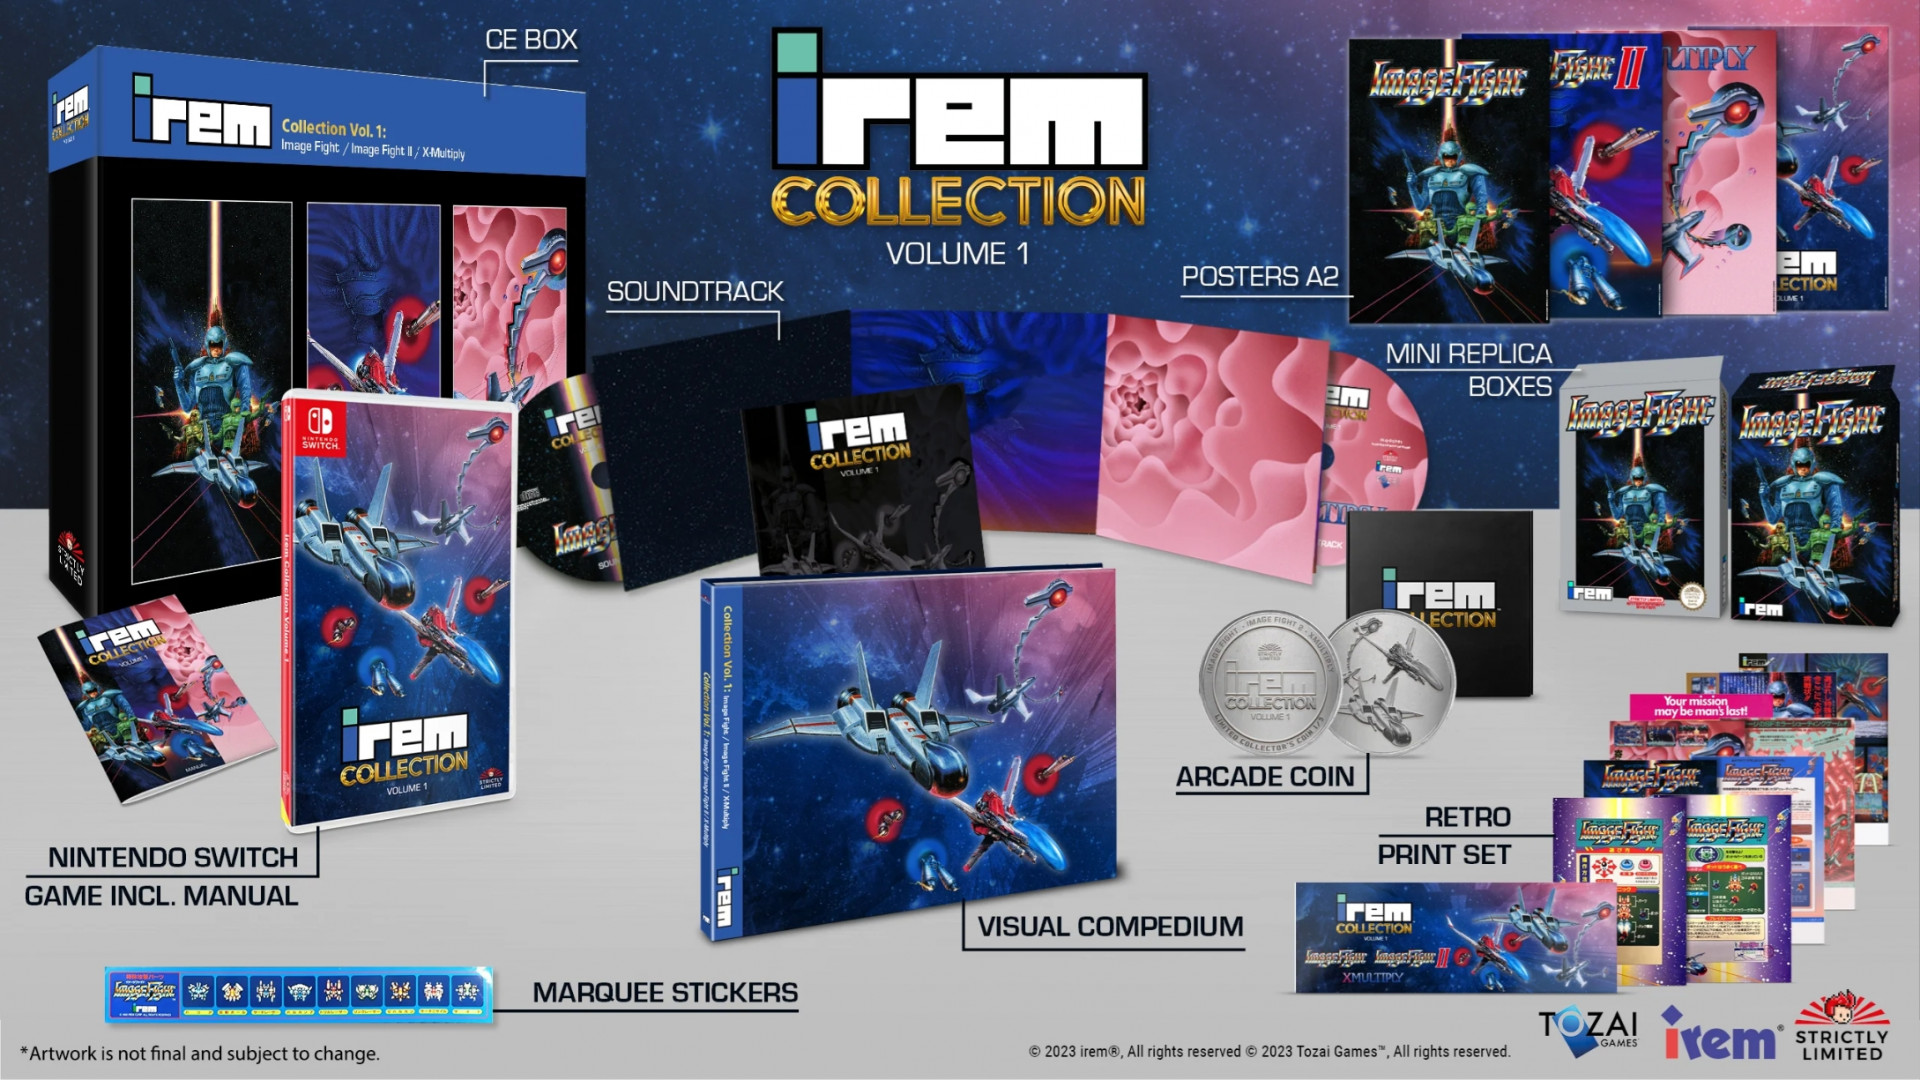 Irem Collection Volume 1 Limited Collector's Edition